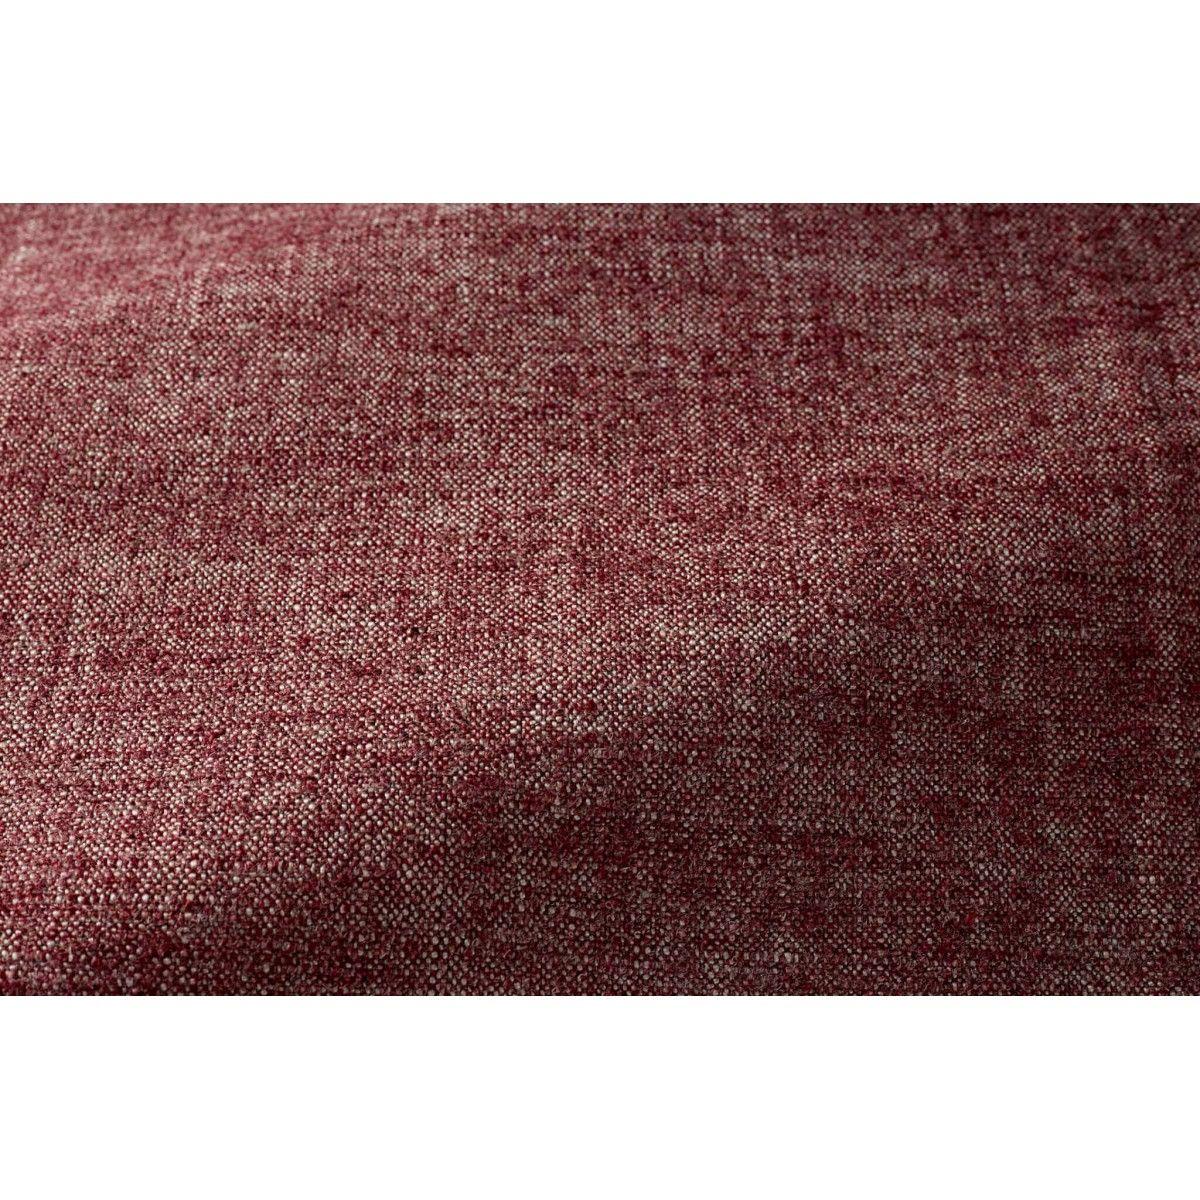 Popus Editions Giovanna 4 seater sofa in Sangria London Linen Fabric

Giovanna is a sofa with a strong profile. A sober, plush line, with this famous detail that changes everything, so as not to forget its strength of character and this charming